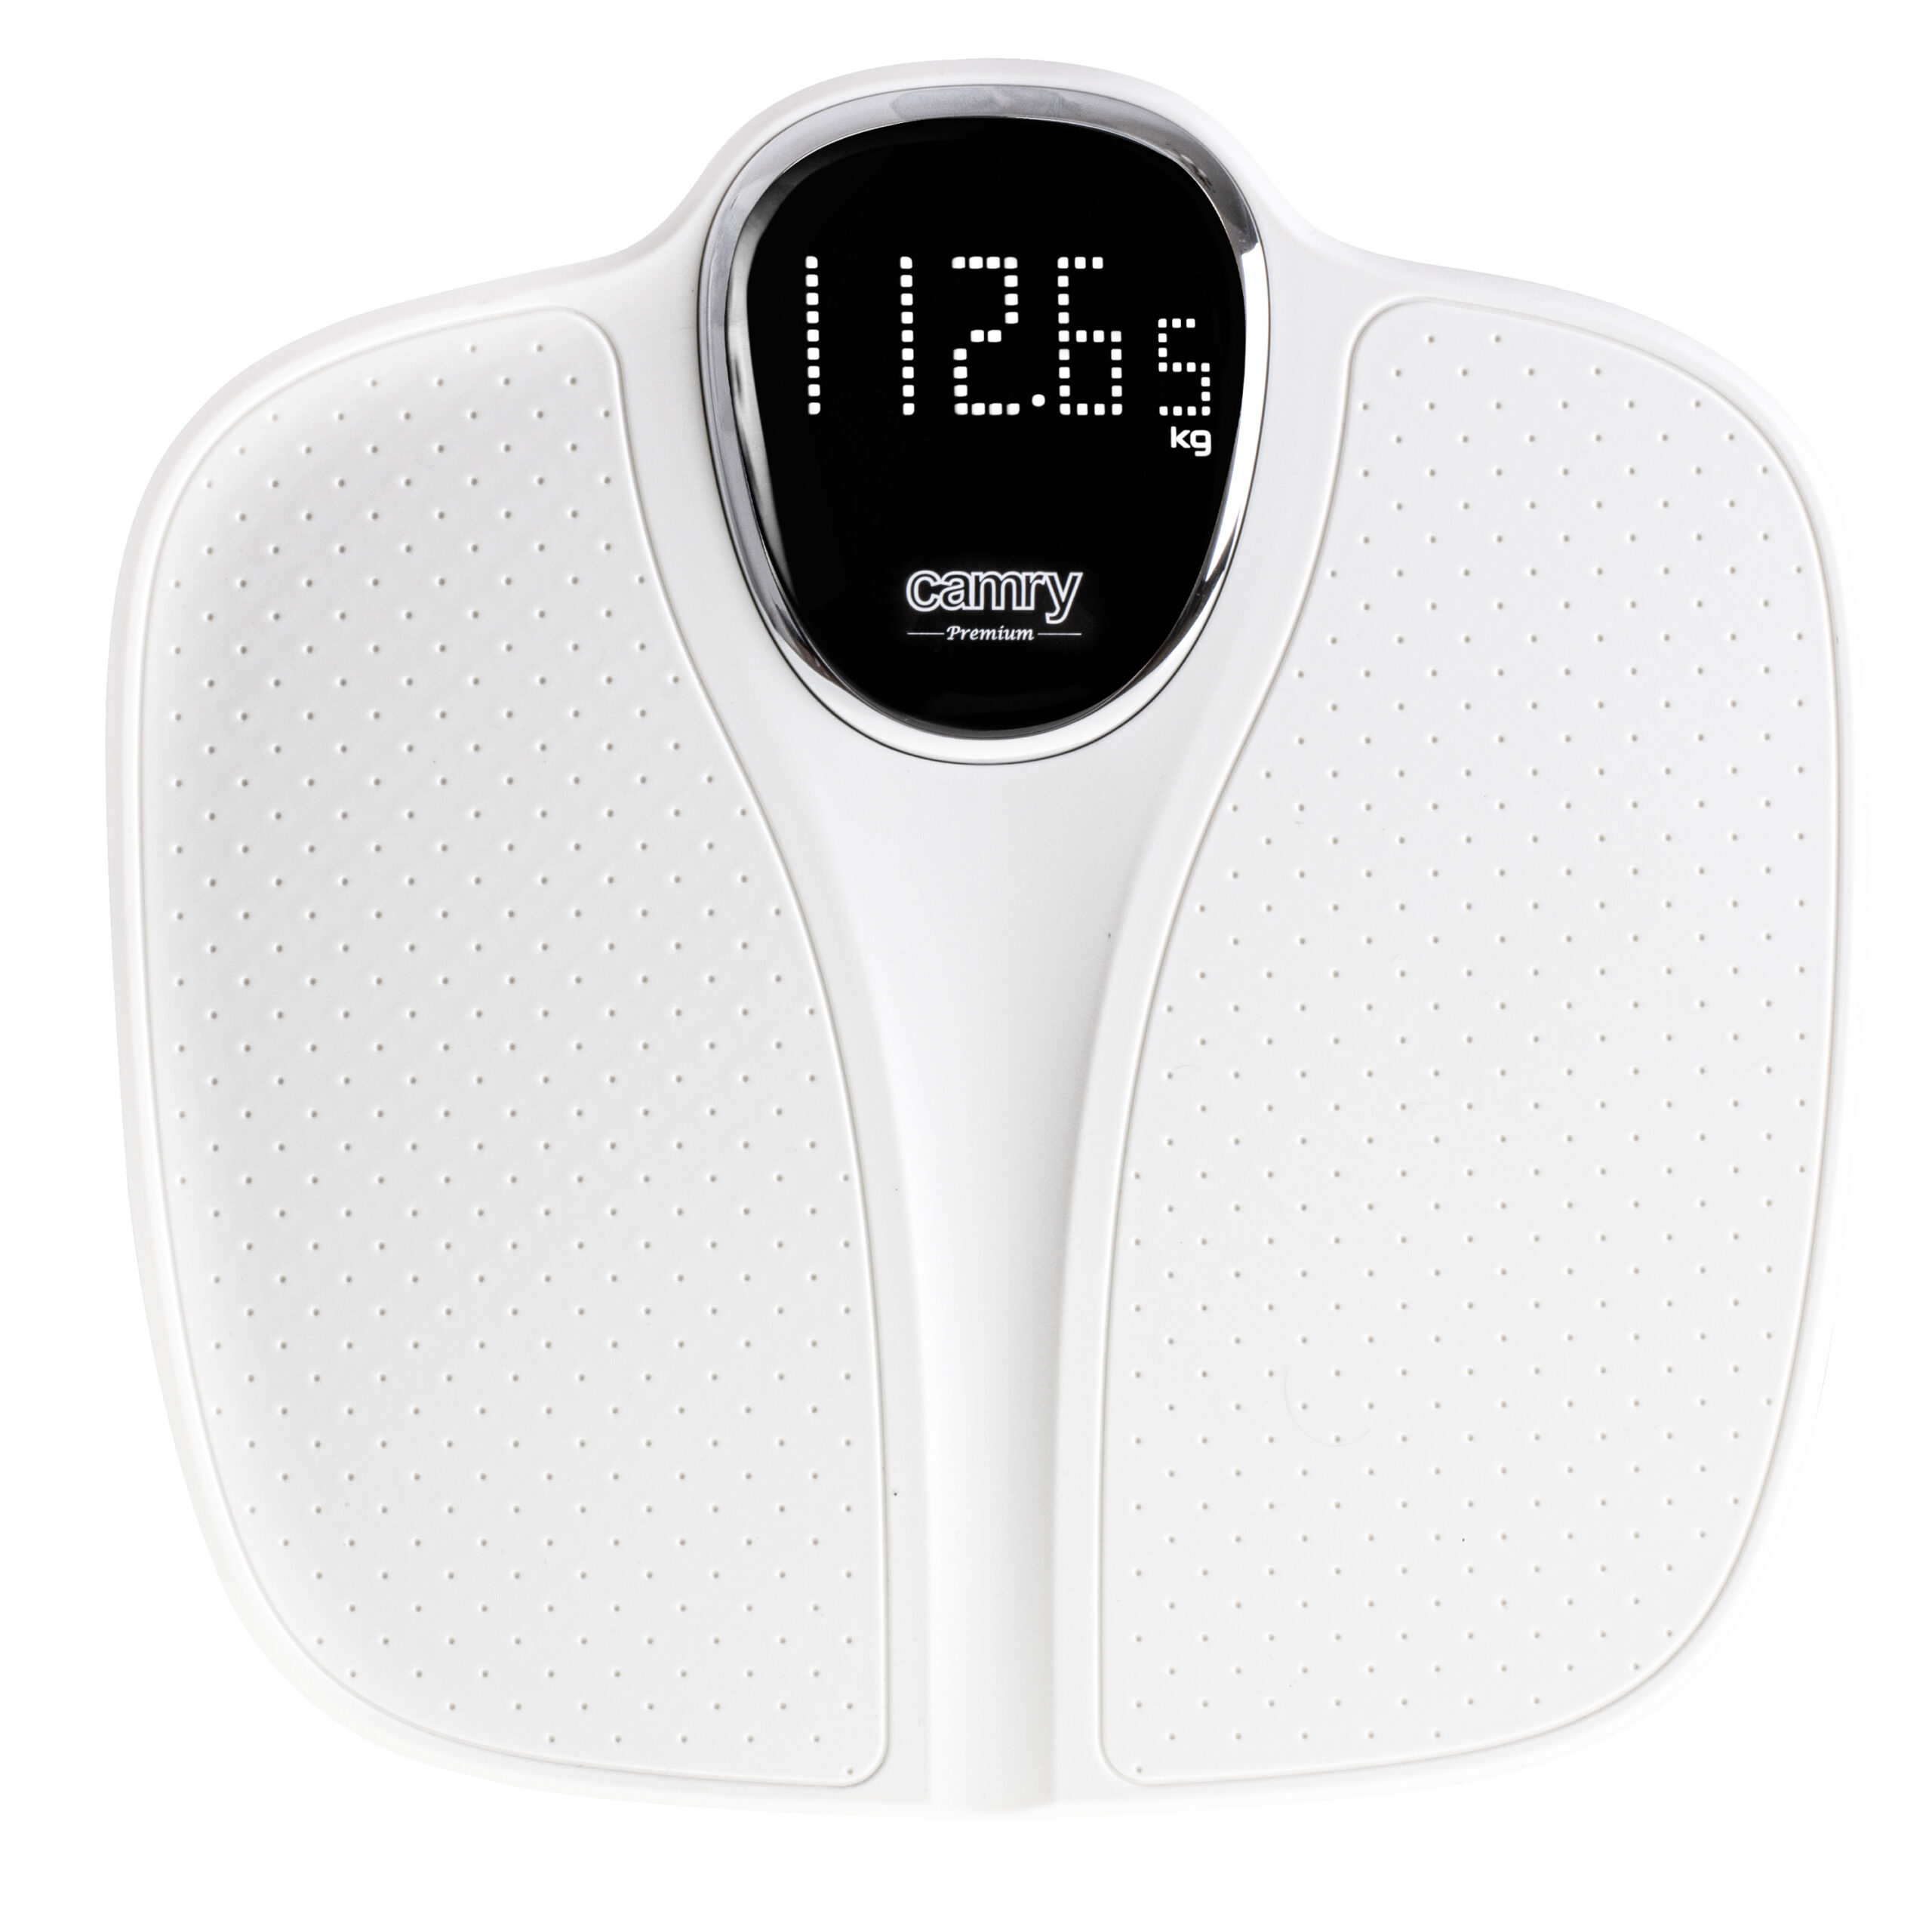 Camry CR 8171w Bathroom scale w/ baby weighing mode – 180kg